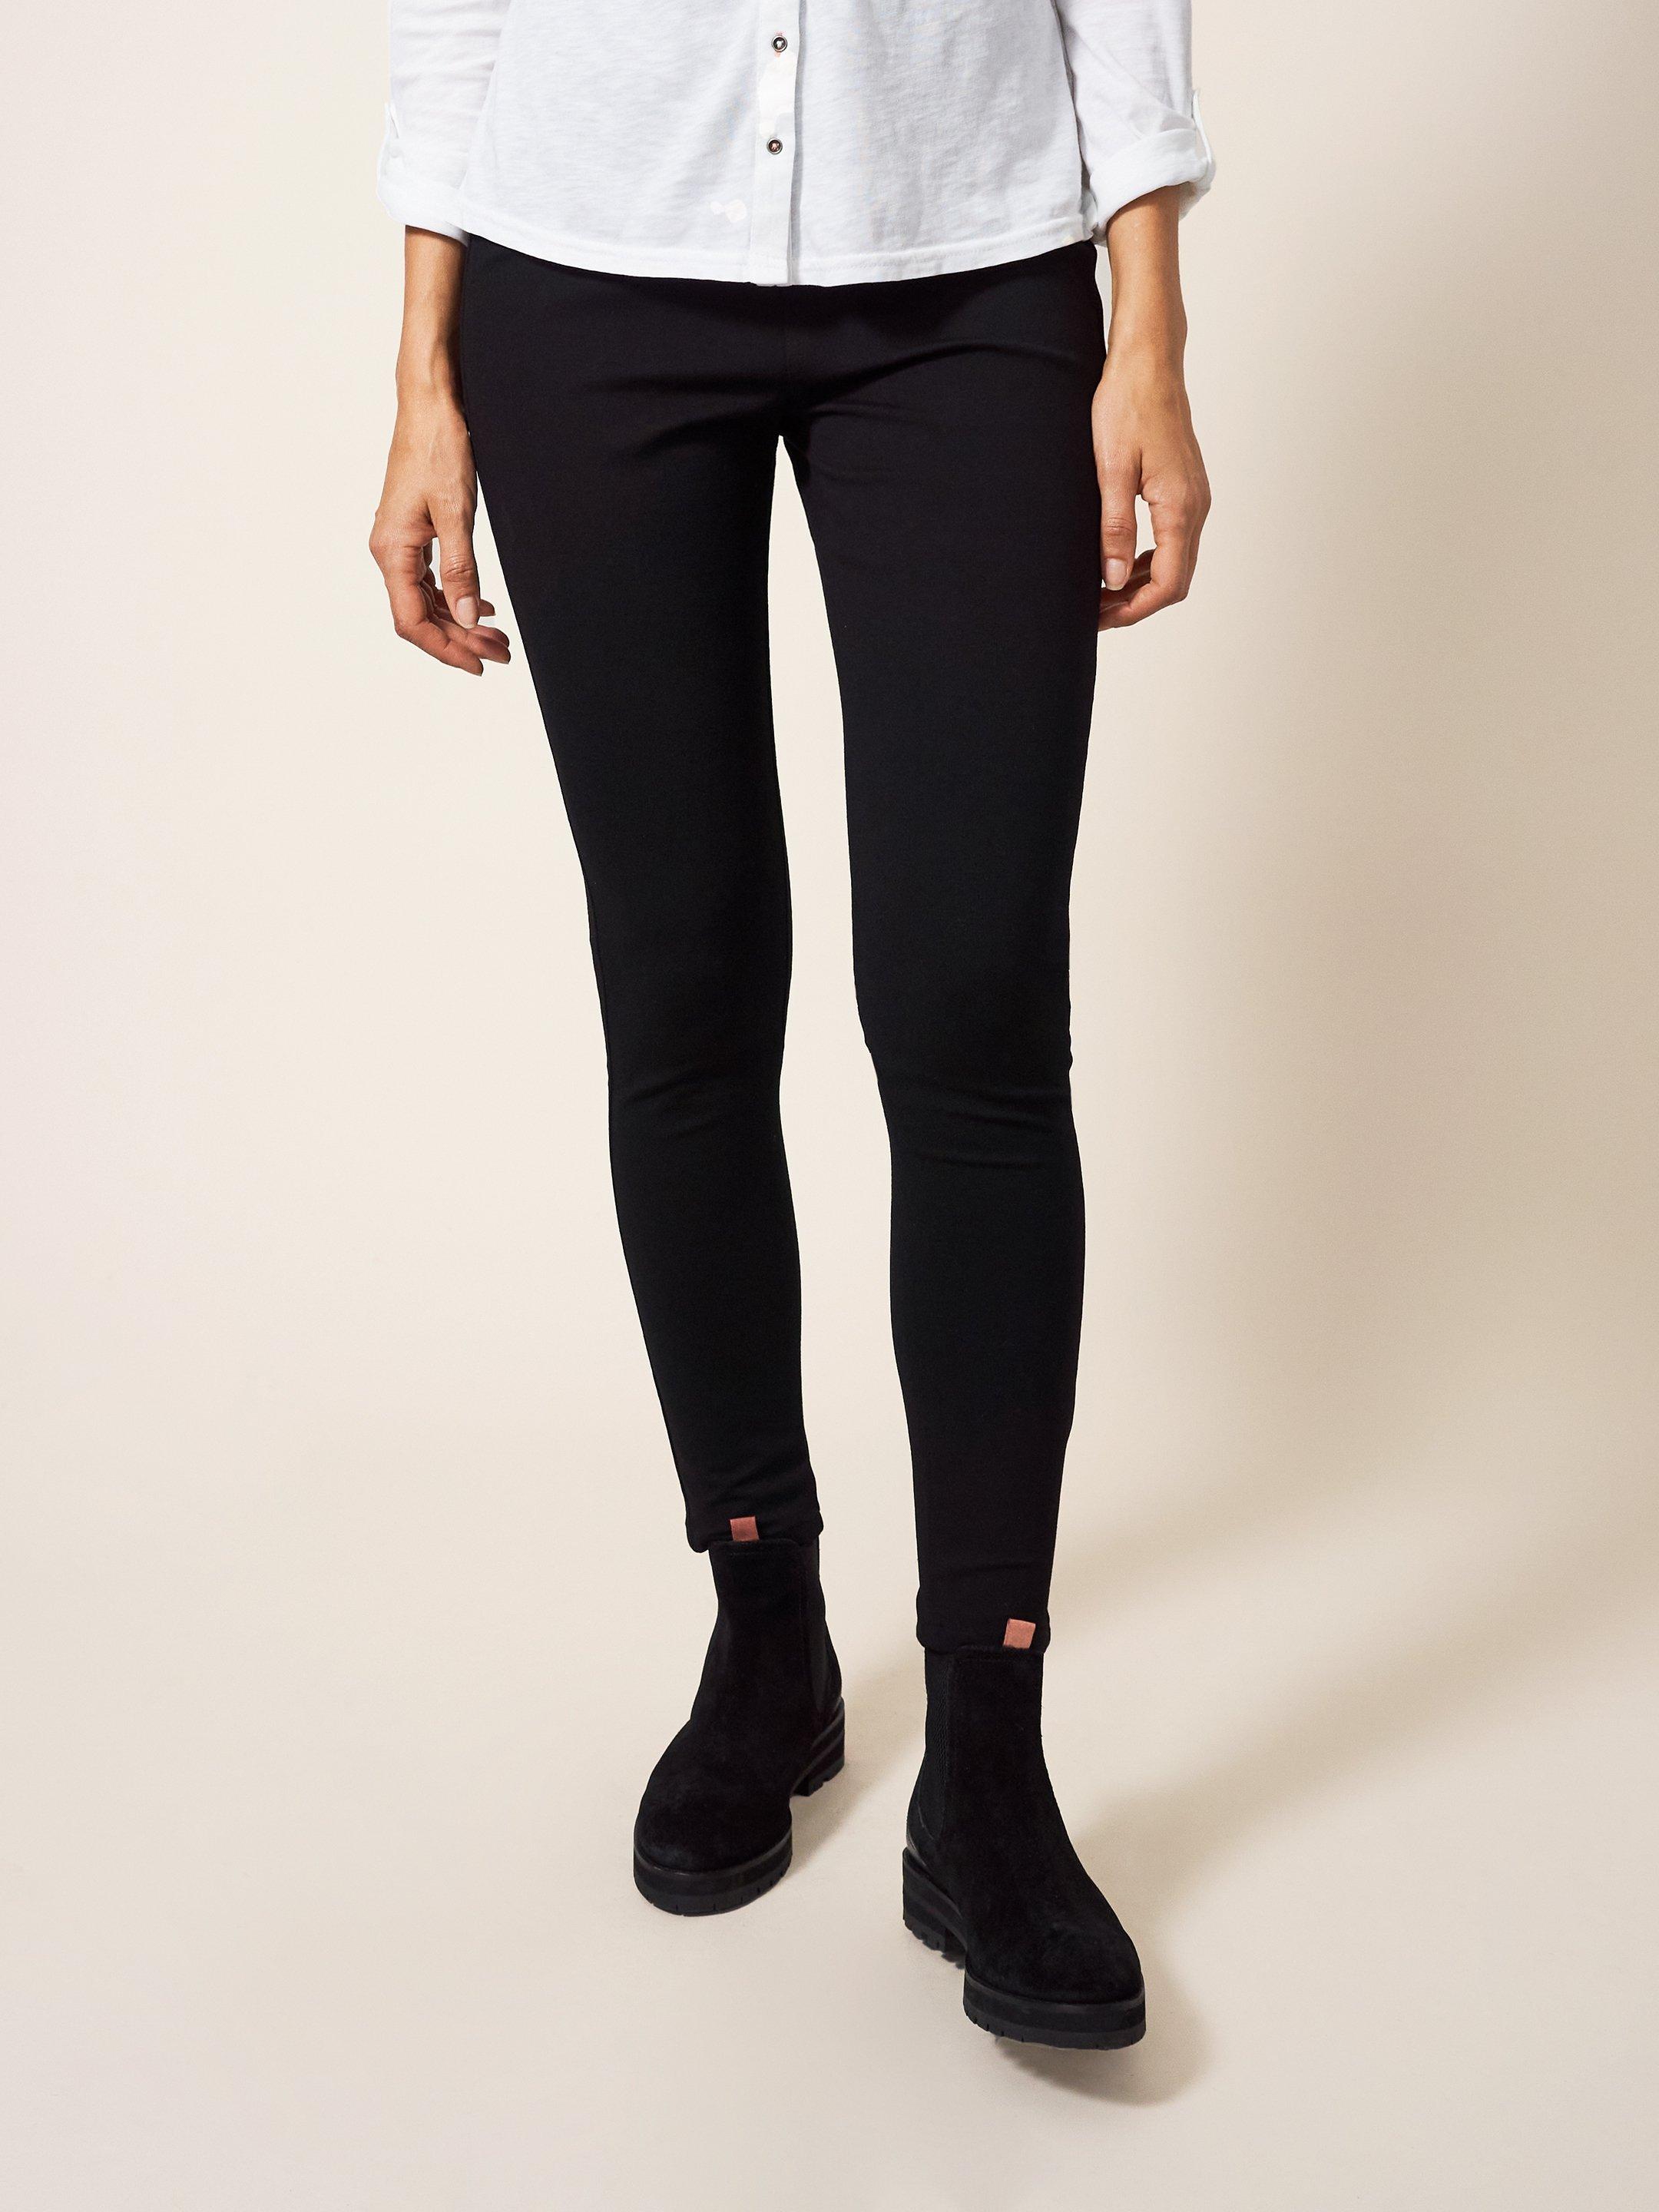 Janey Jeggings WHITE STUFF FEMME CANADA Melanie X Boutiques, 60% OFF